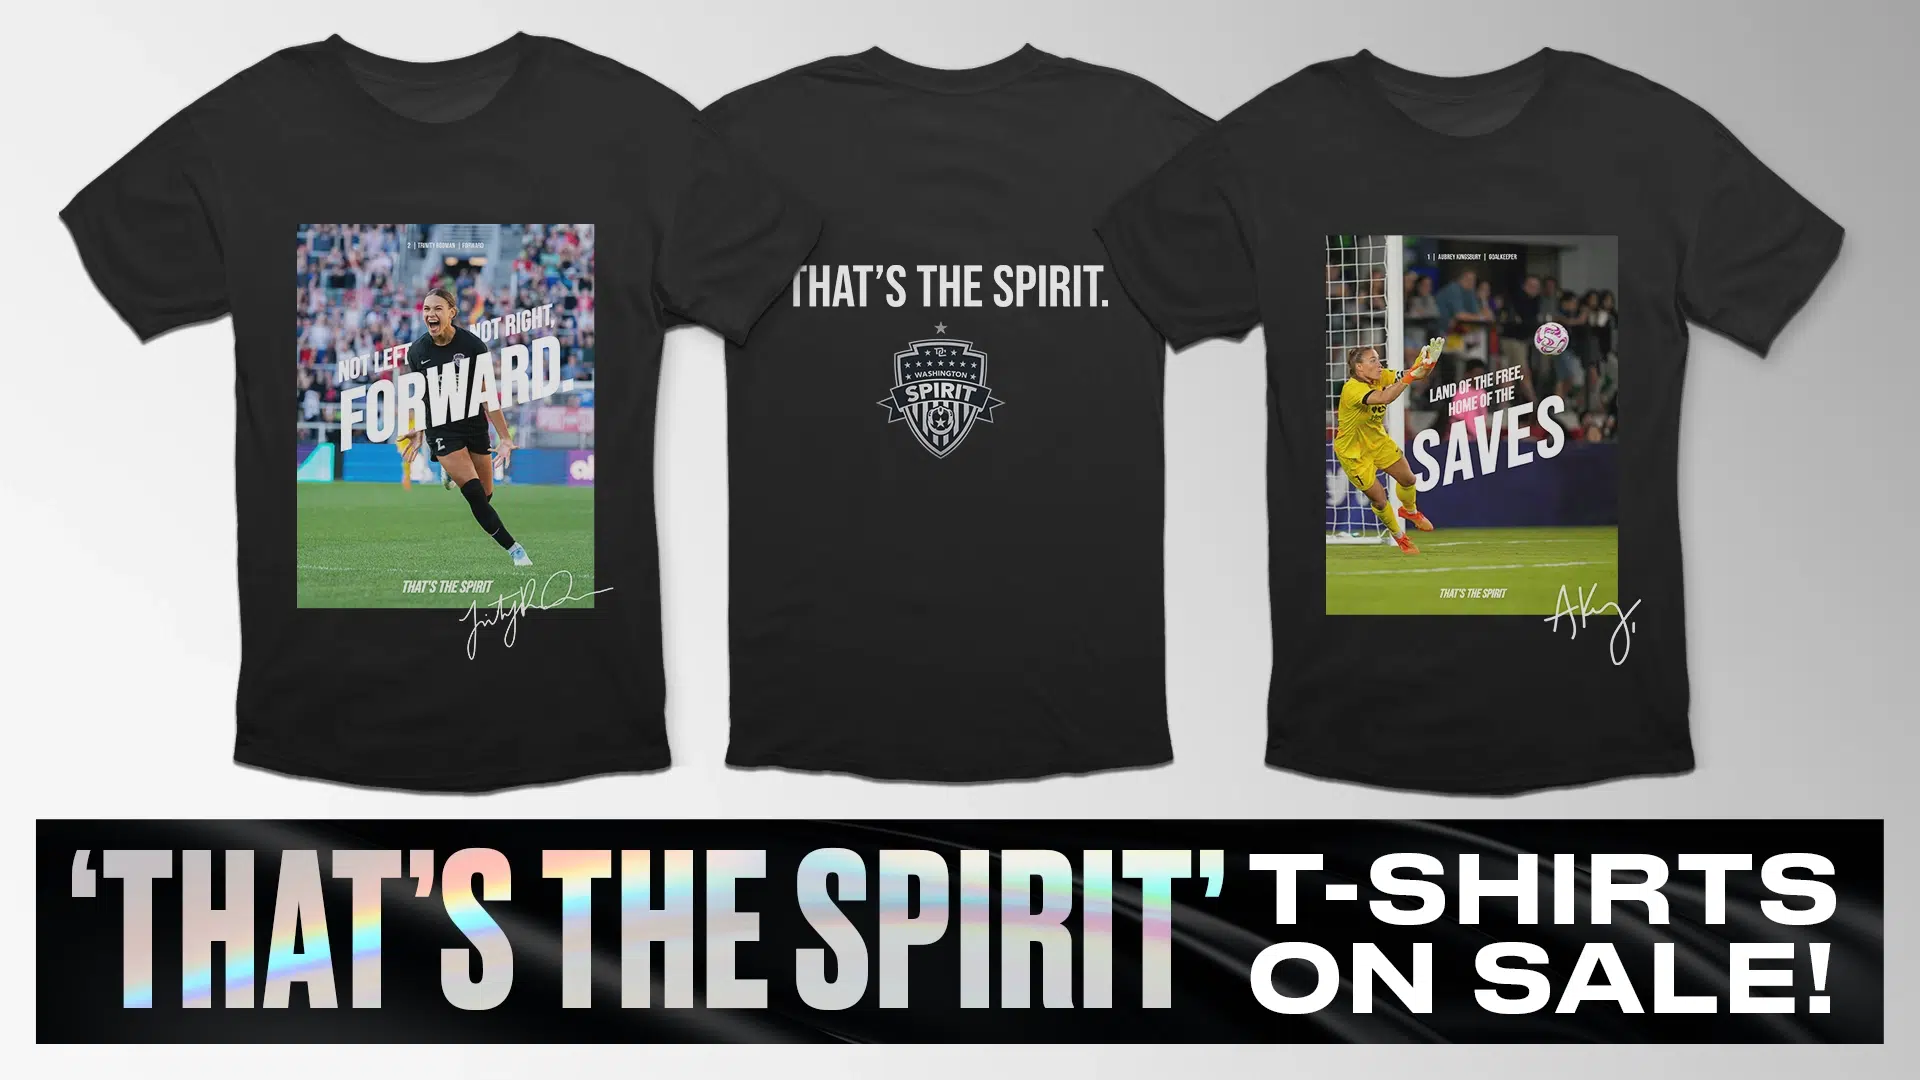 Three black t-shirts are on a gray background. One t-shirt features a photo of Ashley Sanchez, one a photo of Trinity Rodman, and then the third is the back of the shirt with a white "That's The Spirit" above a Spirit crest. Below the image, "That's The Spirit T-Shirts On Sale!" is written.